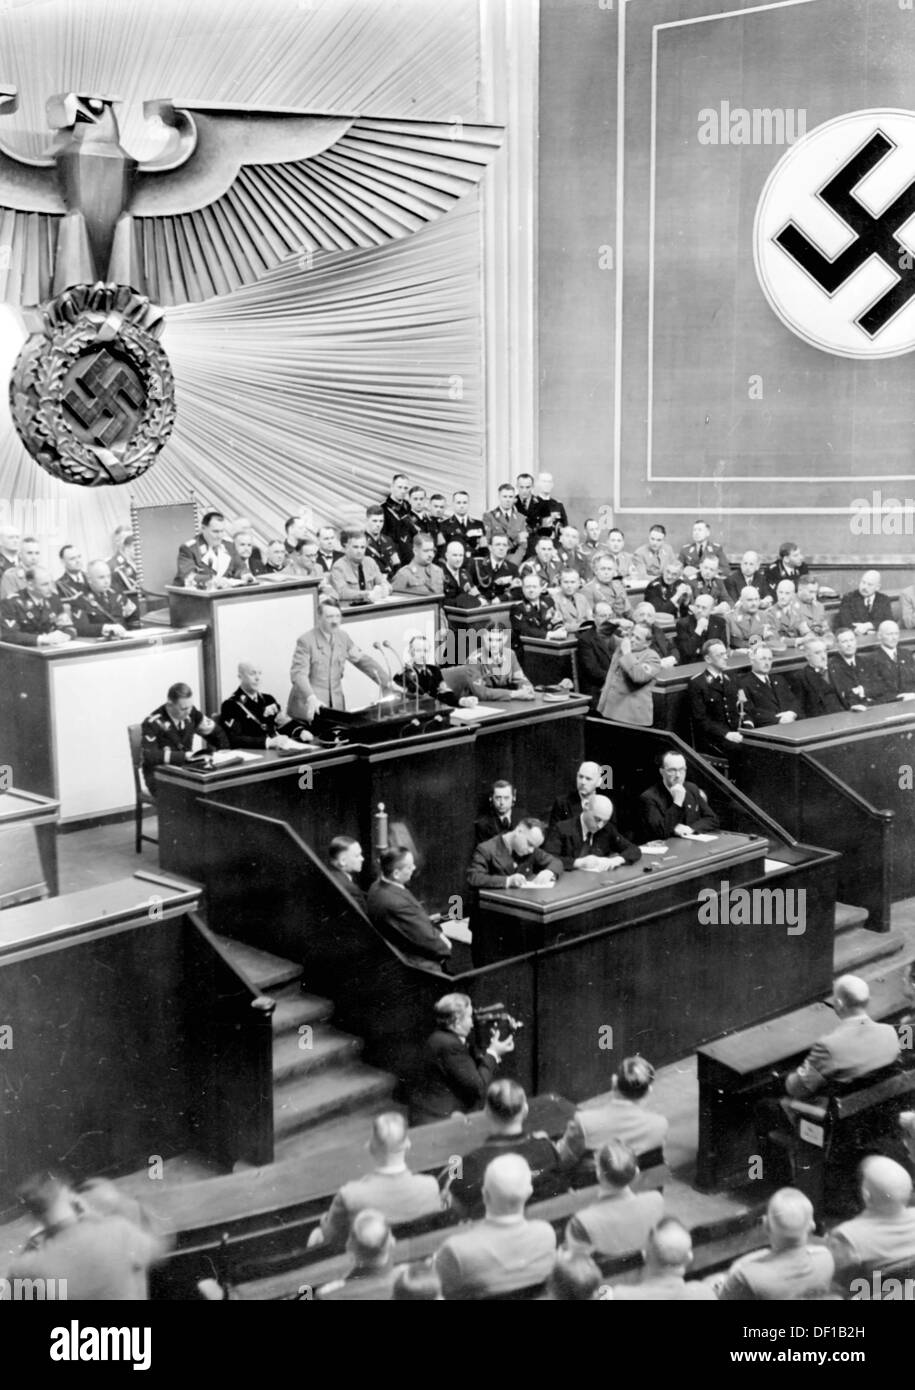 The image from the Nazi Propaganda! shows Reich Chancellor Adolf Hitler delivering a speech in the Kroll Opera House in Berlin, Germany, 18 March 1938. The speech dealt with, among other topics, the annexation of Austria by the German Reich. To the right, the Austrian government headed by Arthur Seyß-Inquart is pictured, to the left, the German Reich government. Fotoarchiv für Zeitgeschichte Stock Photo